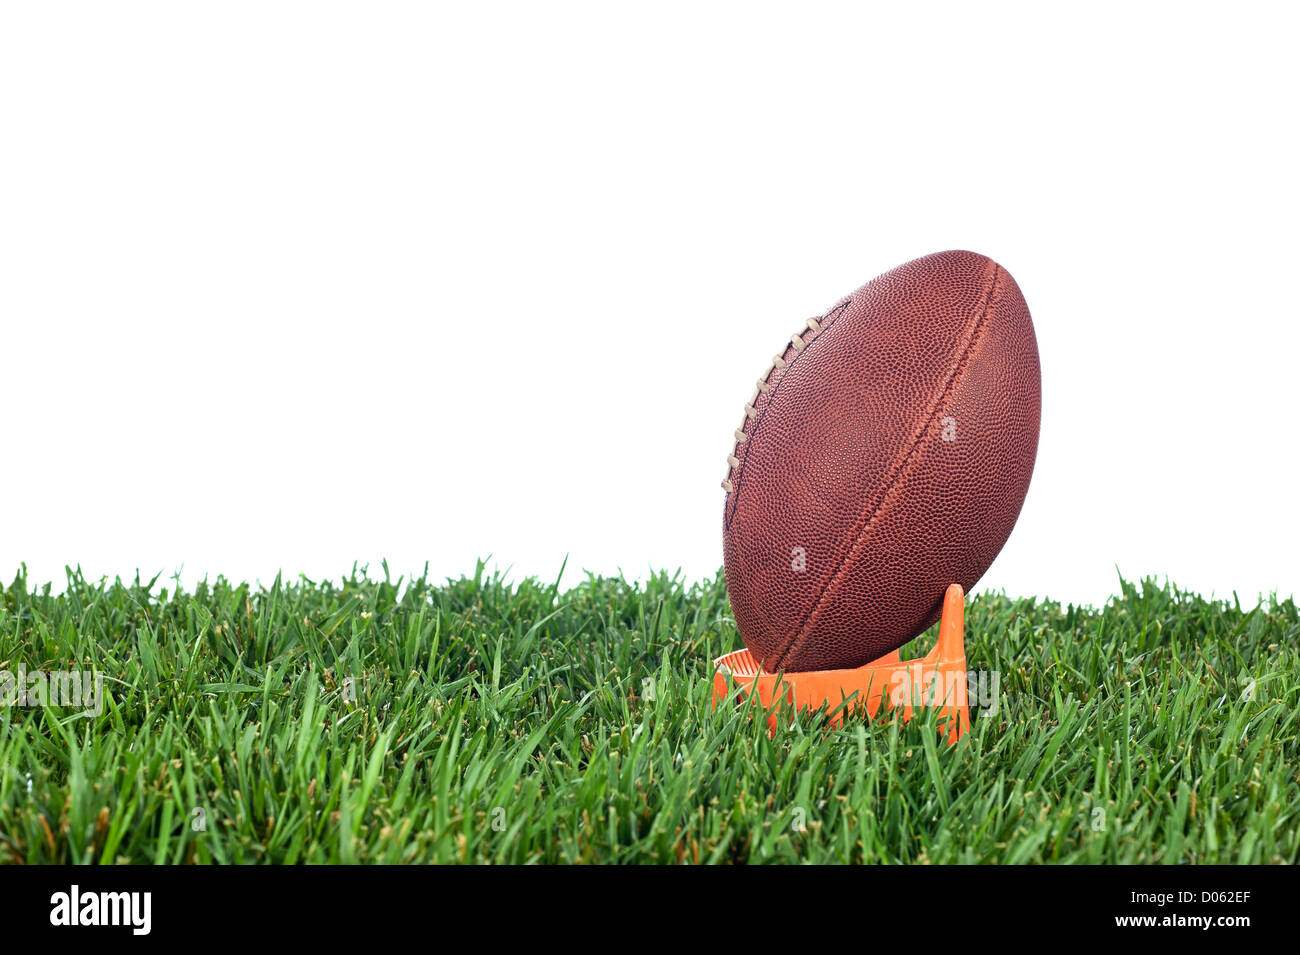 Football tee on green grass waiting for a kick off. White background for placement of copy. Stock Photo